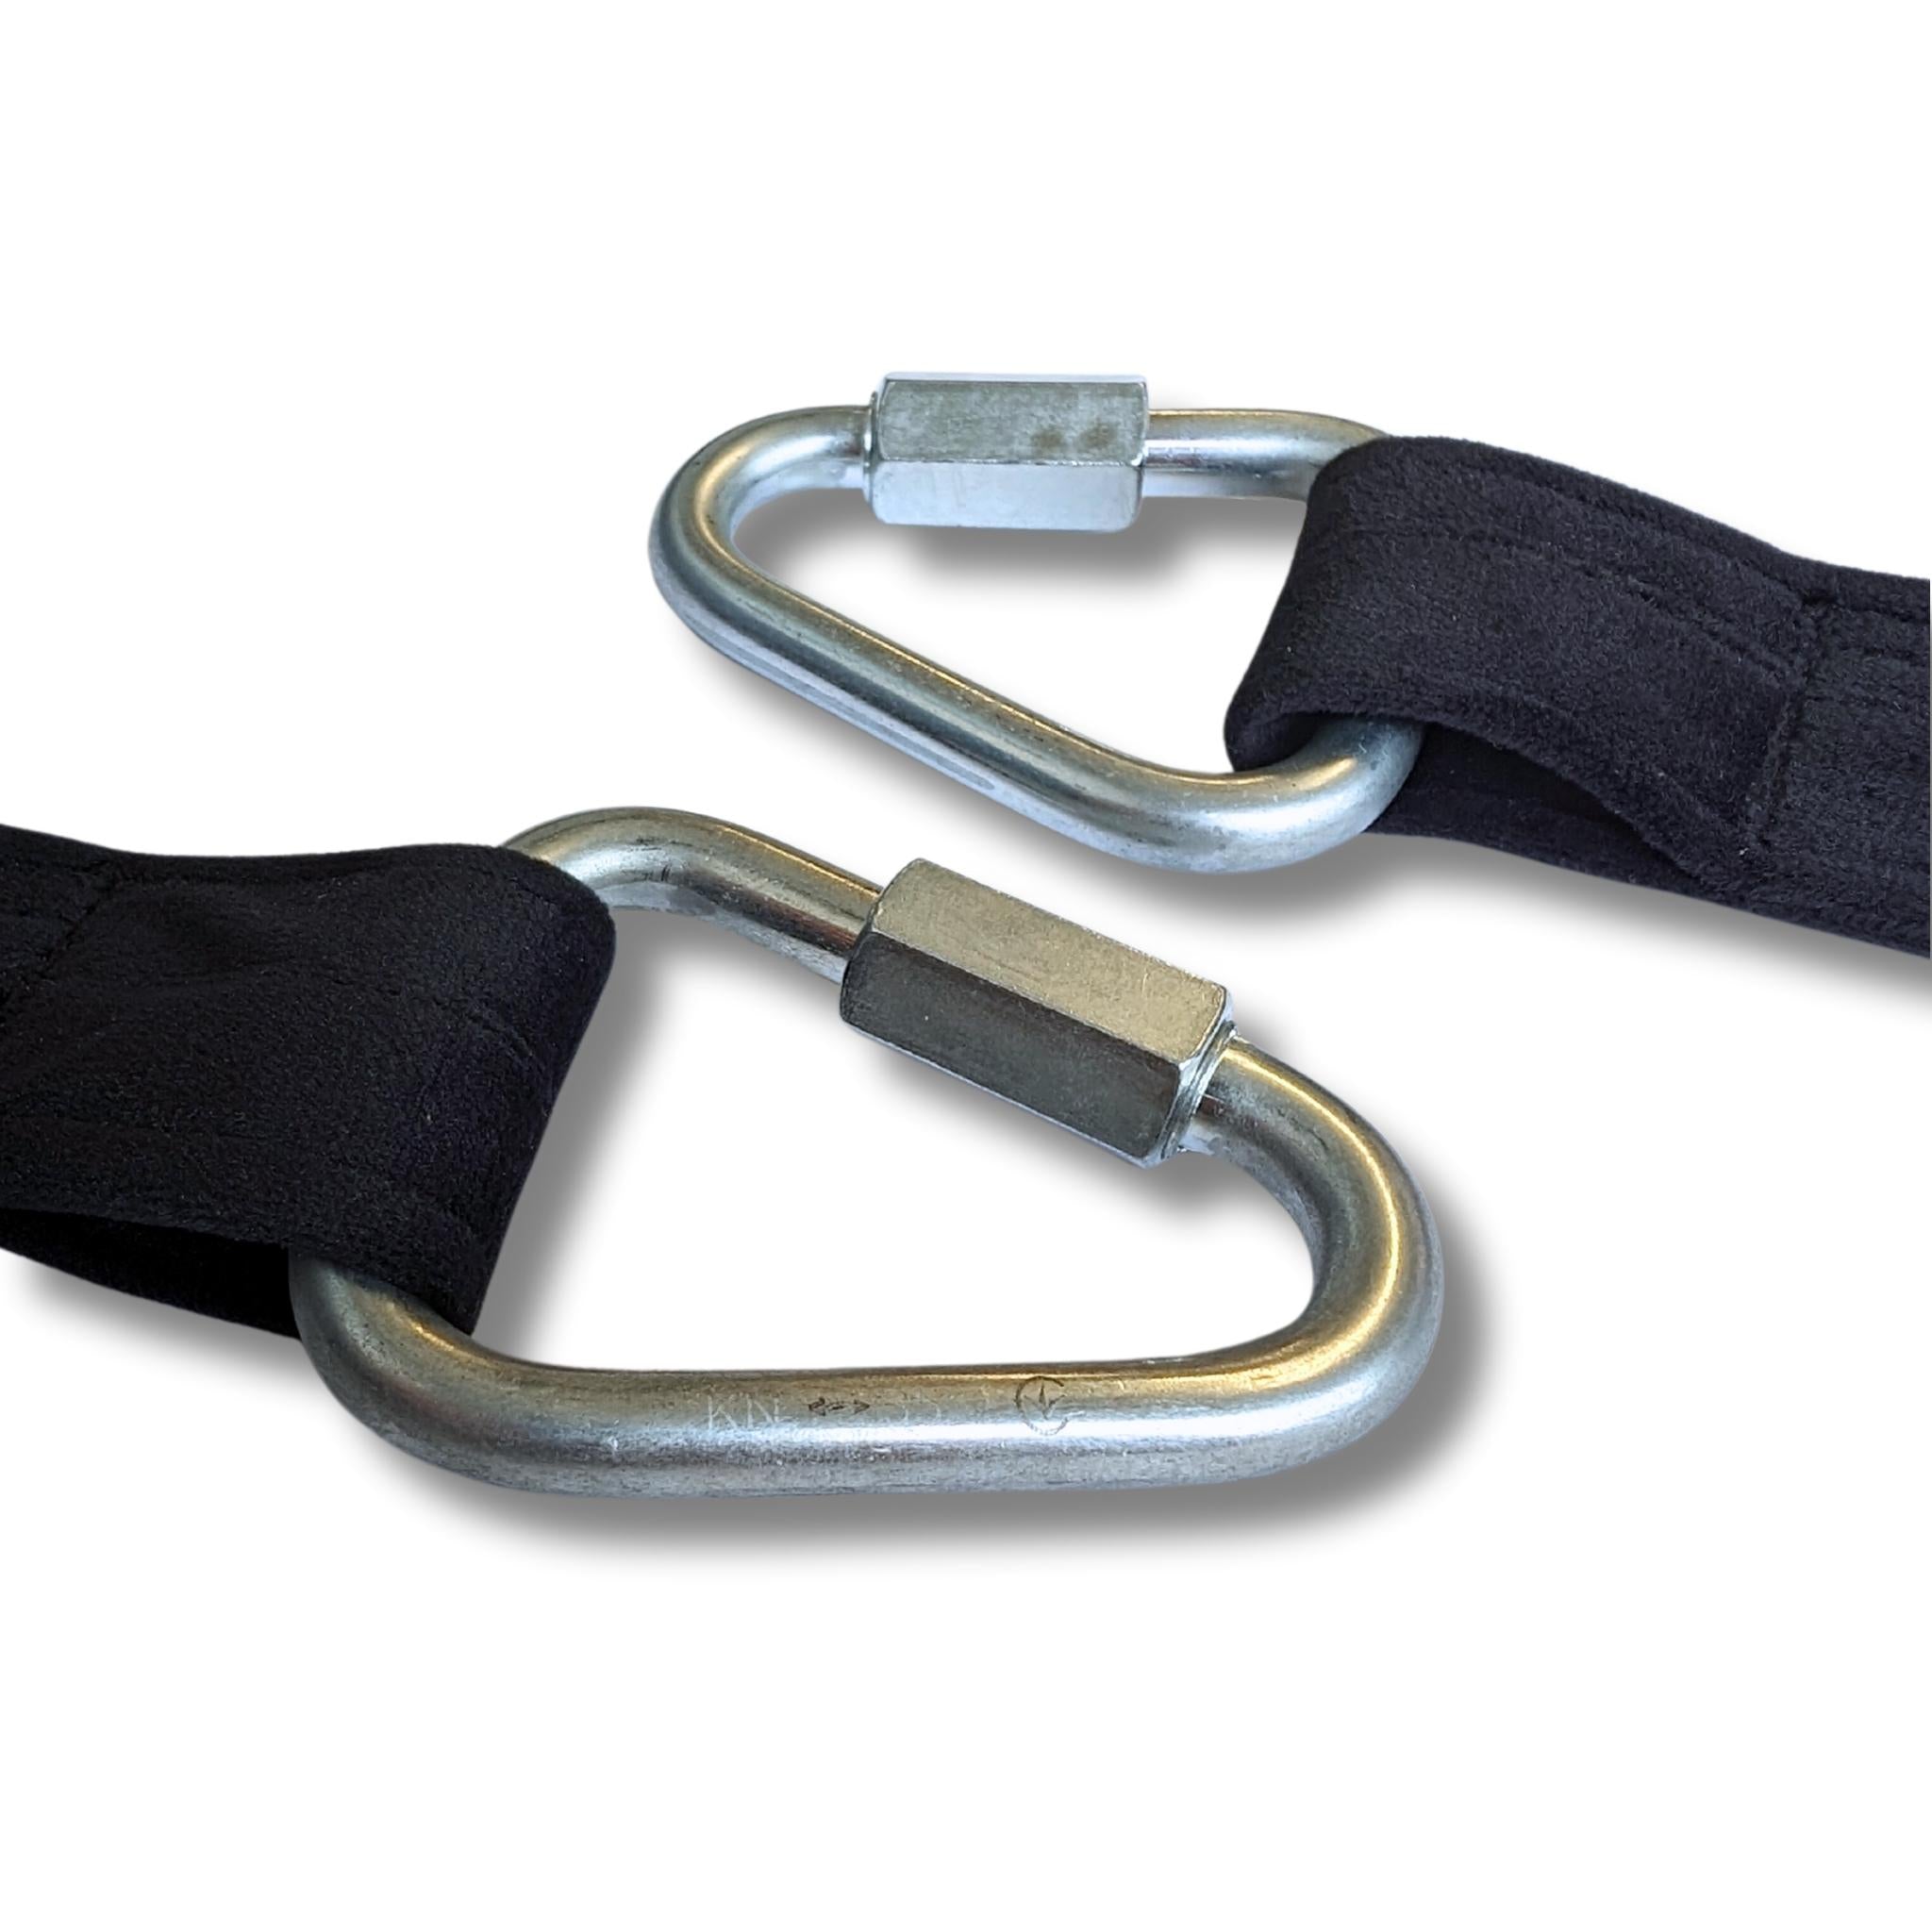 Triangle carabiner for aerial straps & bodyloops